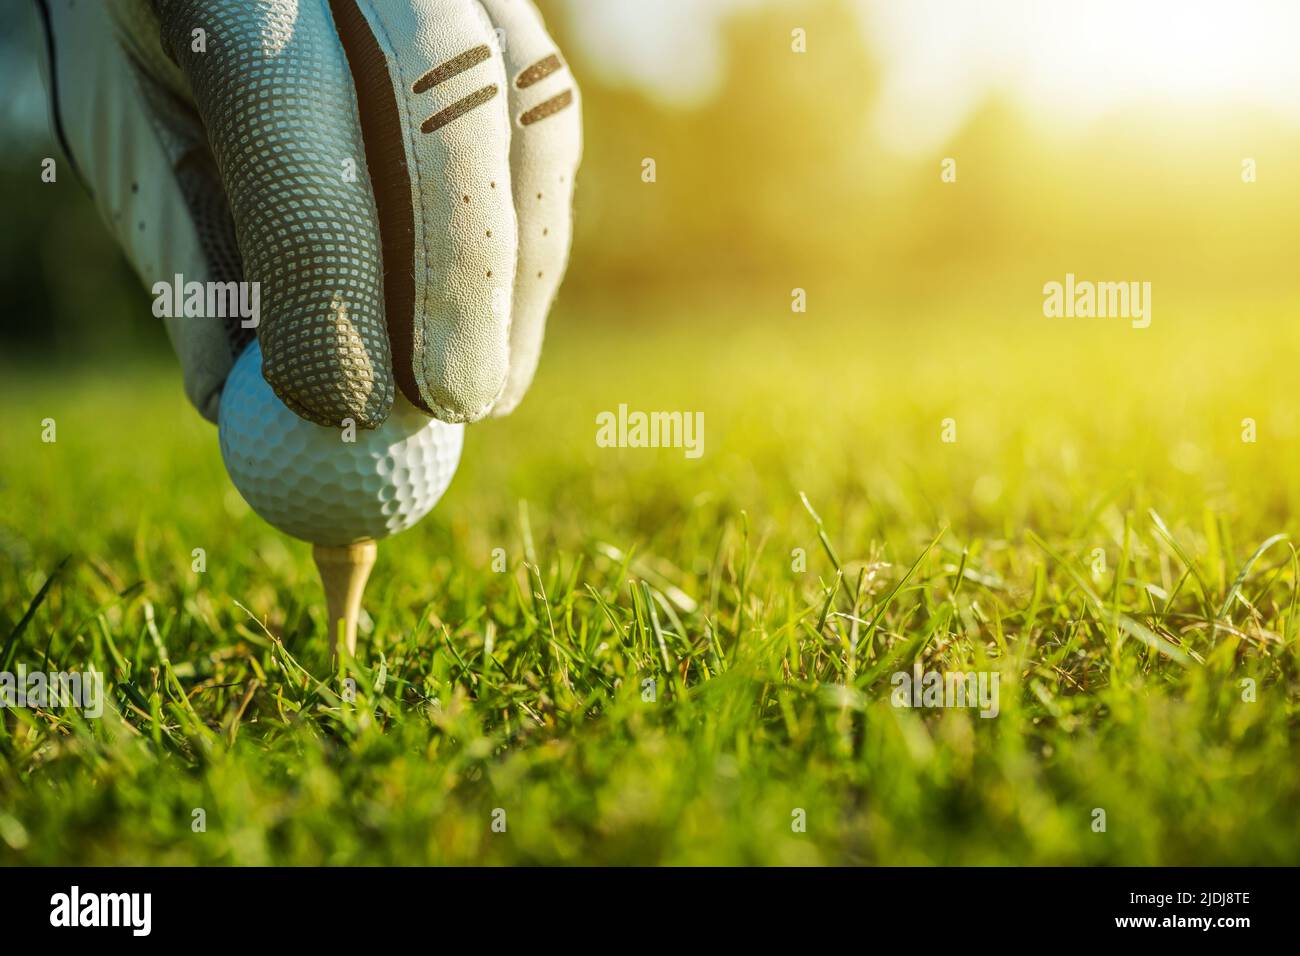 Golf Player Placing a Ball on a Tee Using His Left Hand. Sunny Summer Golf Course. Close Up. Stock Photo